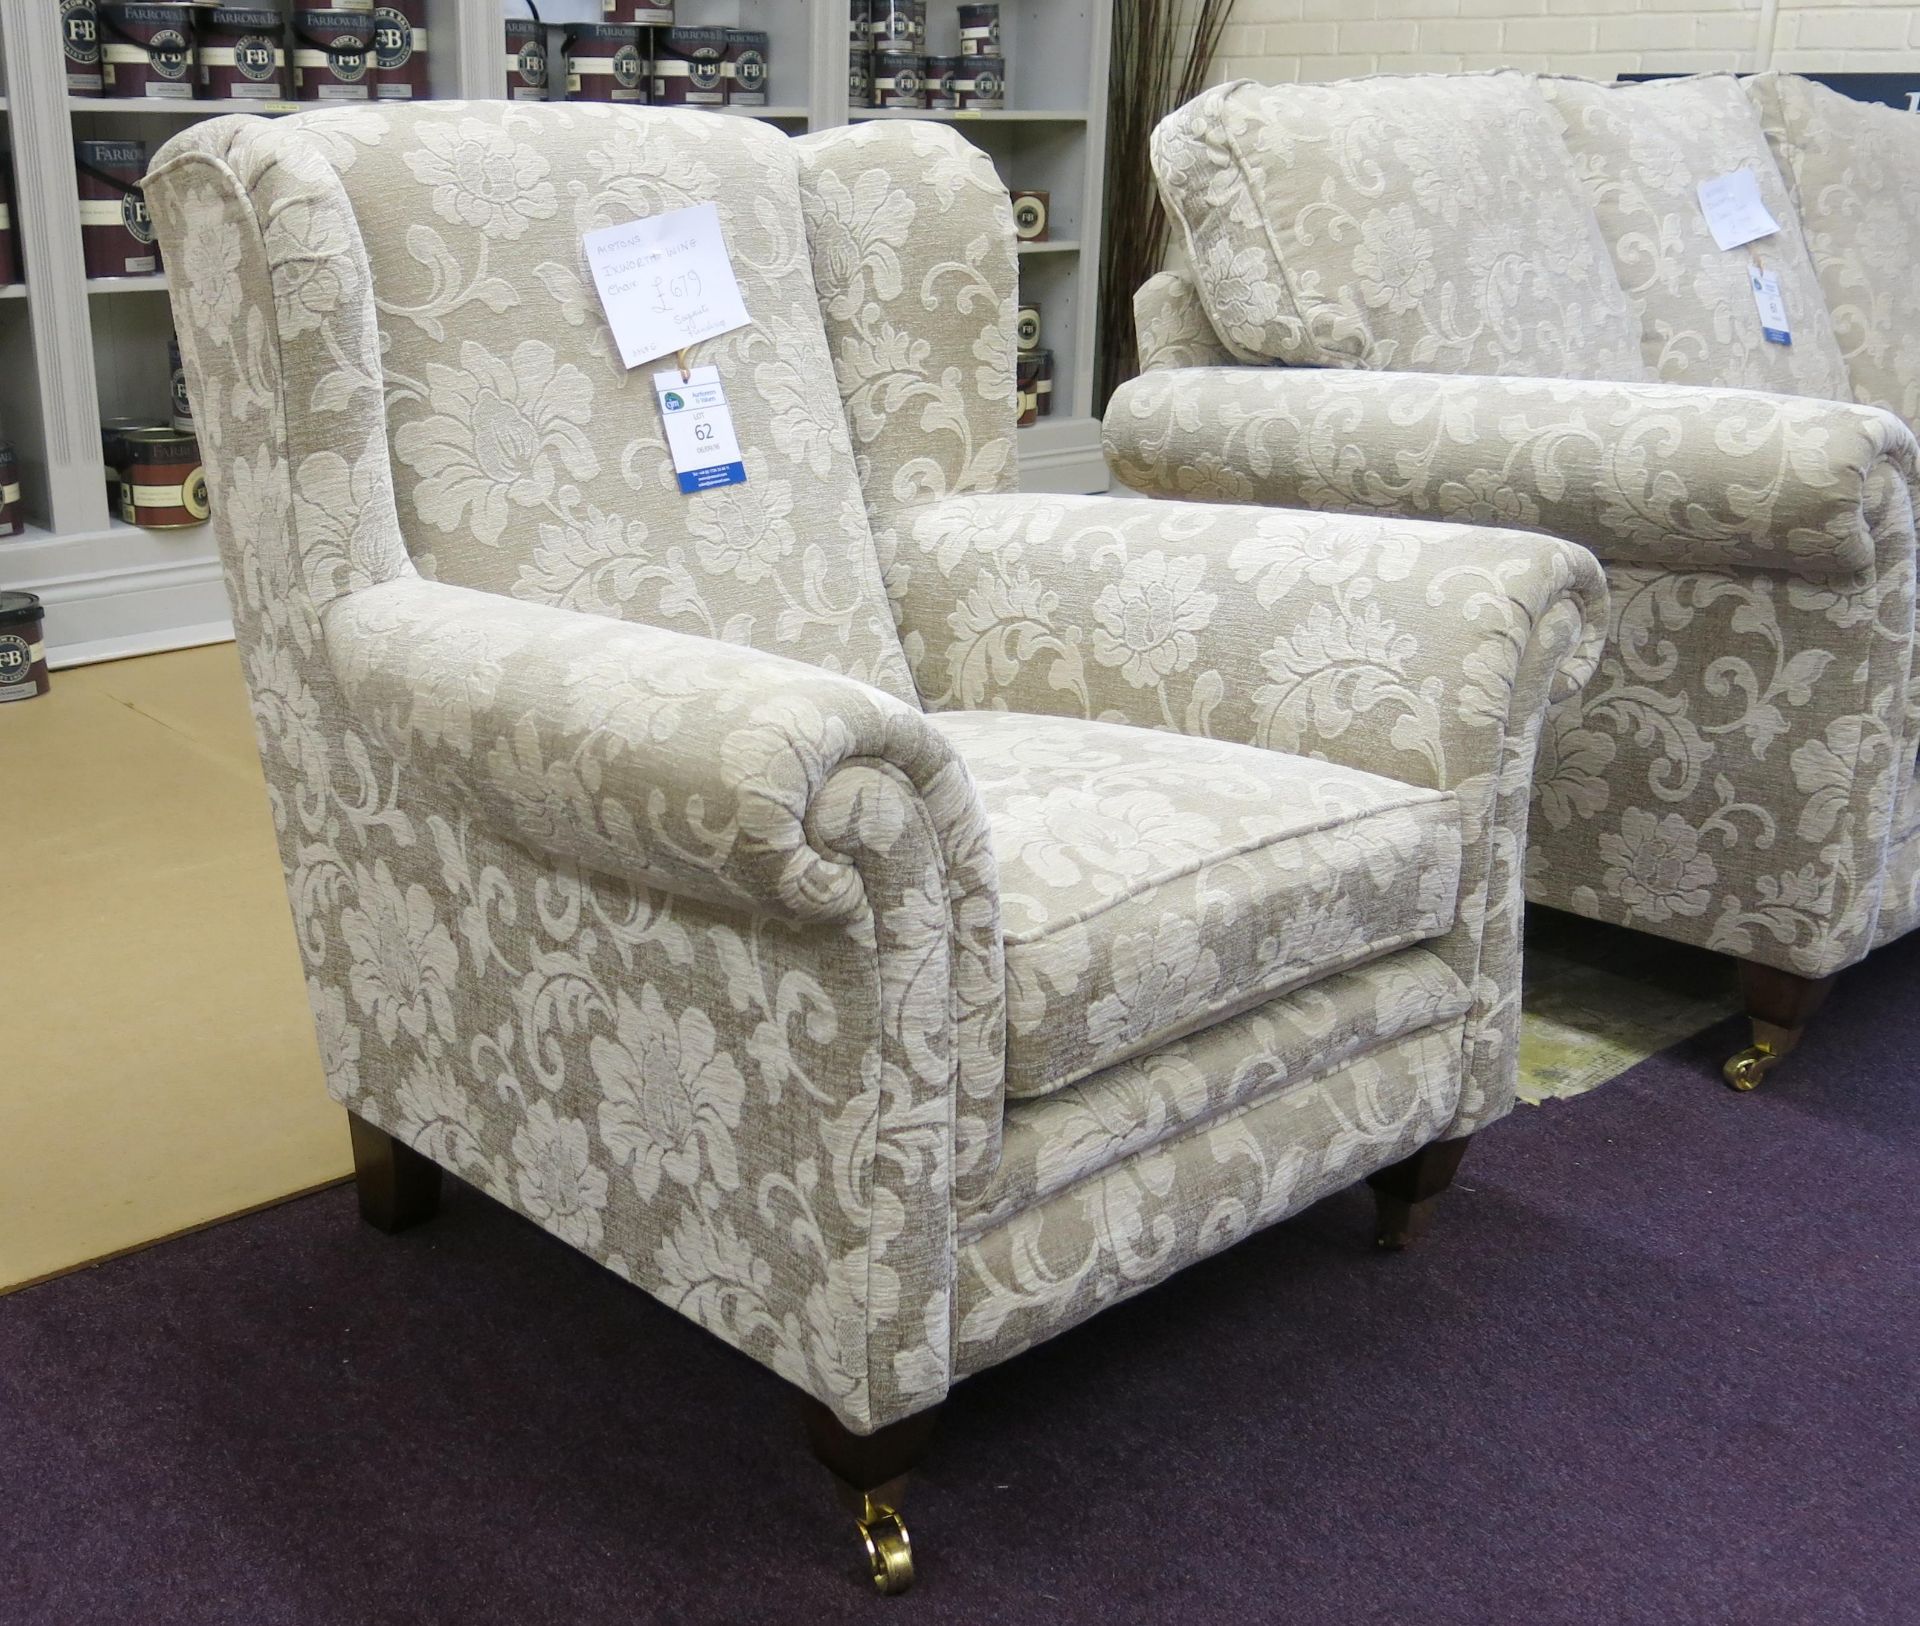 Alstons Ixworth wing back chair with polished brass castors on front feet. RRP £679 - Image 2 of 3